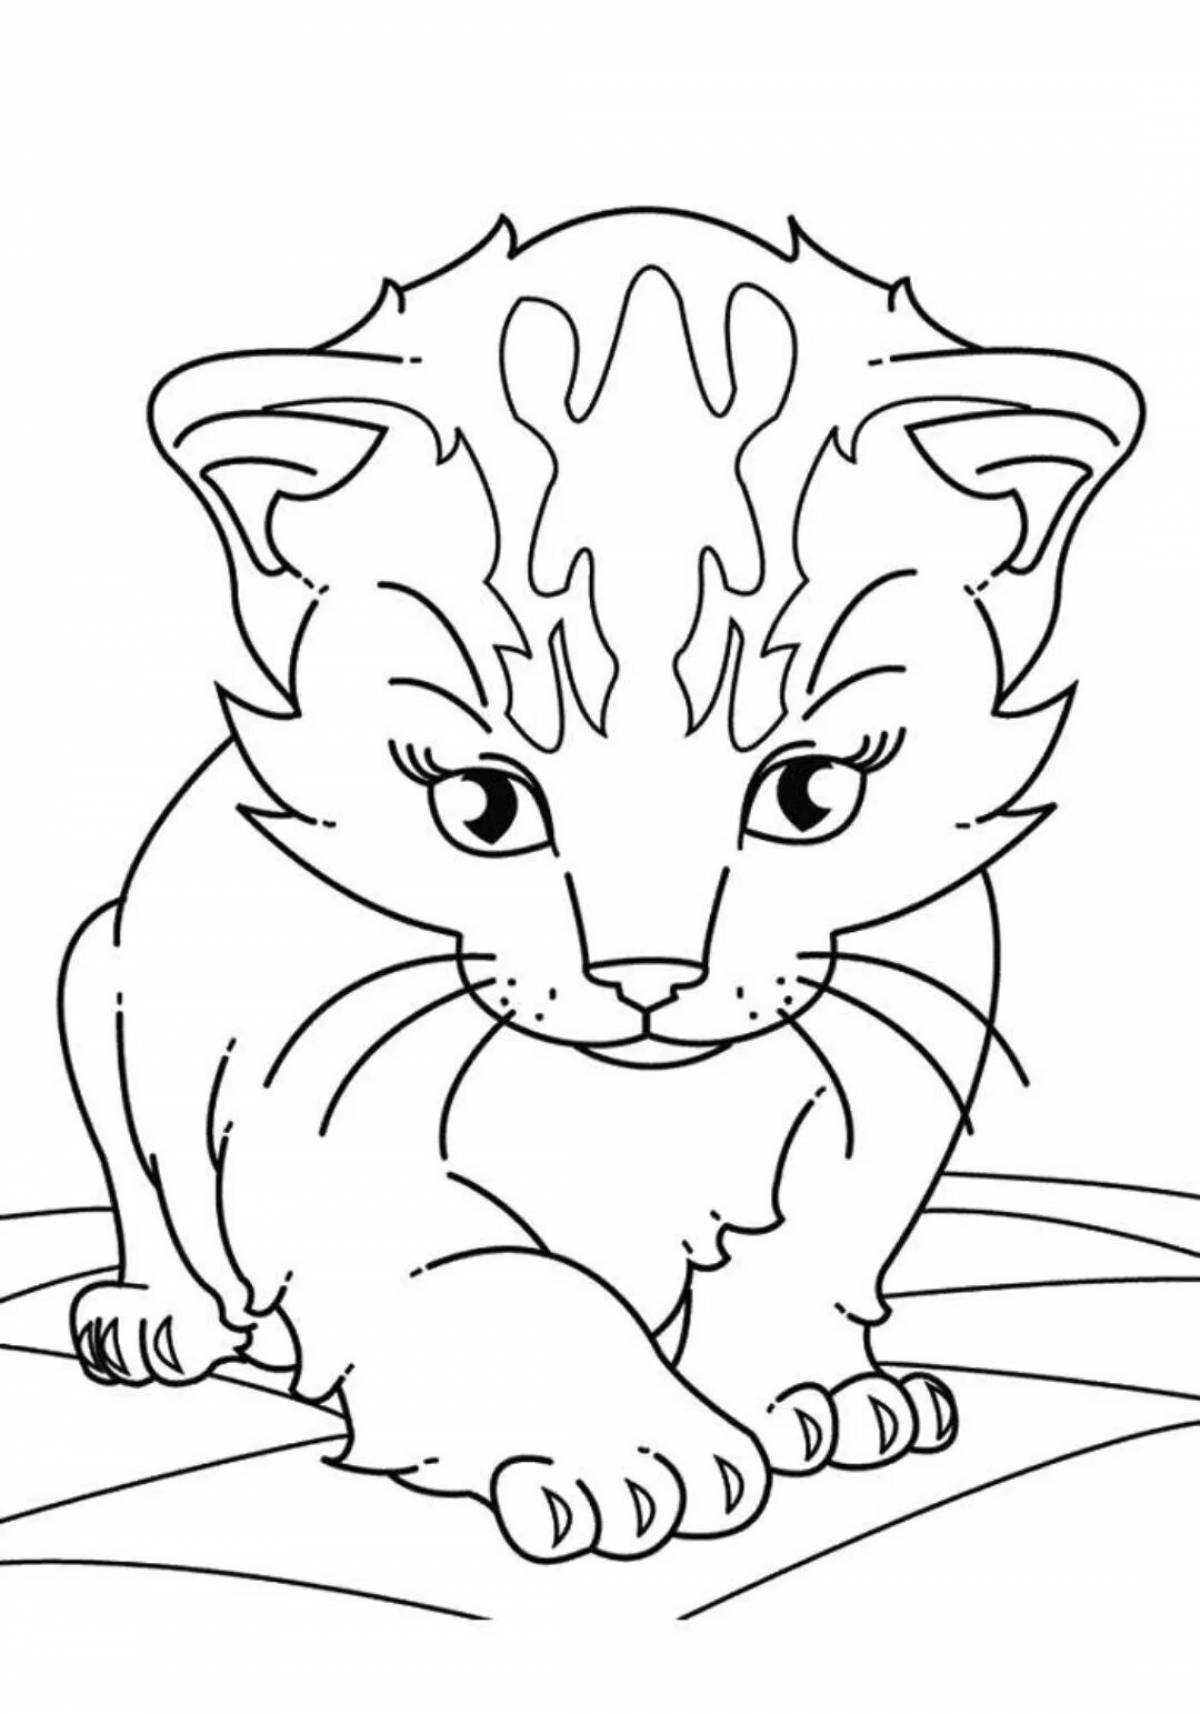 Unique animal coloring pages for girls